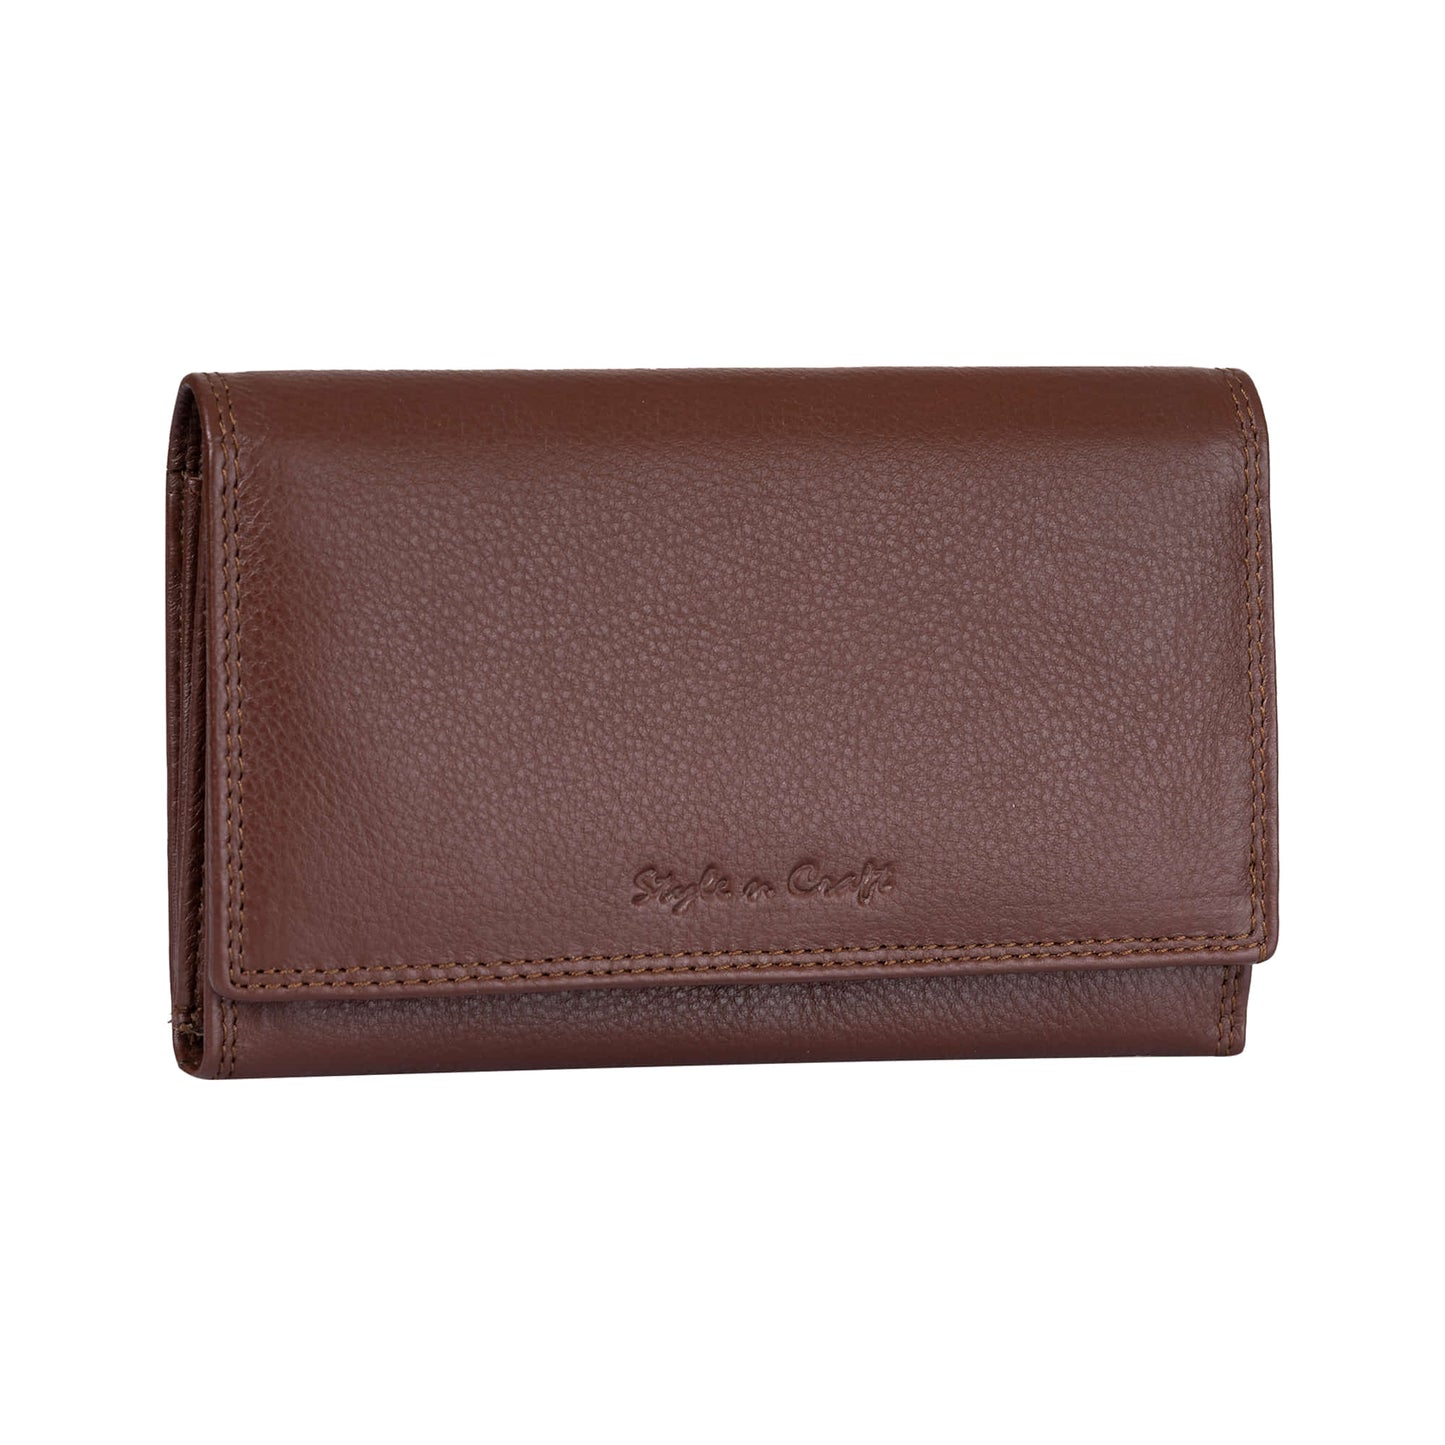 Style n Craft 391102 Ladies Clutch Wallet in Brown Full Grain Leather - Front View - Angled - Closed